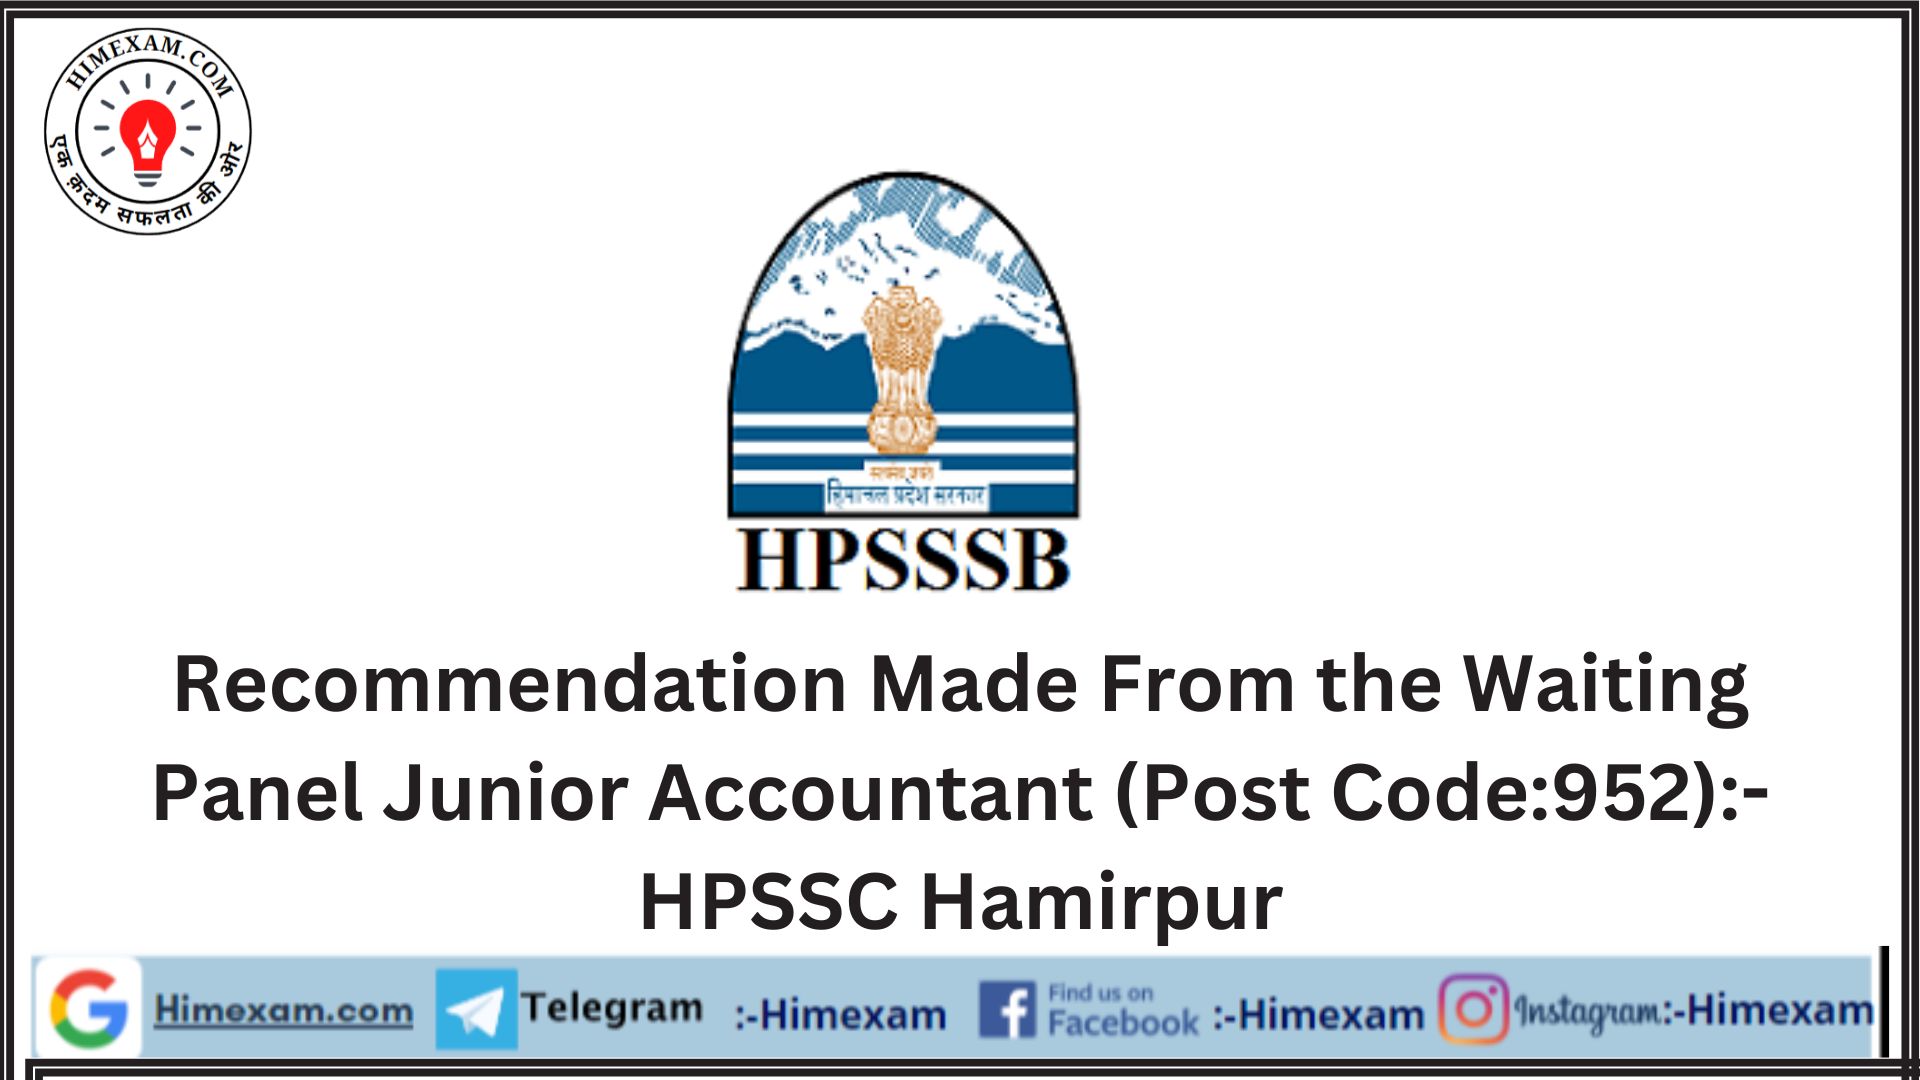 Recommendation Made From the Waiting Panel  Junior Accountant (Post Code:952):- HPSSC Hamirpur